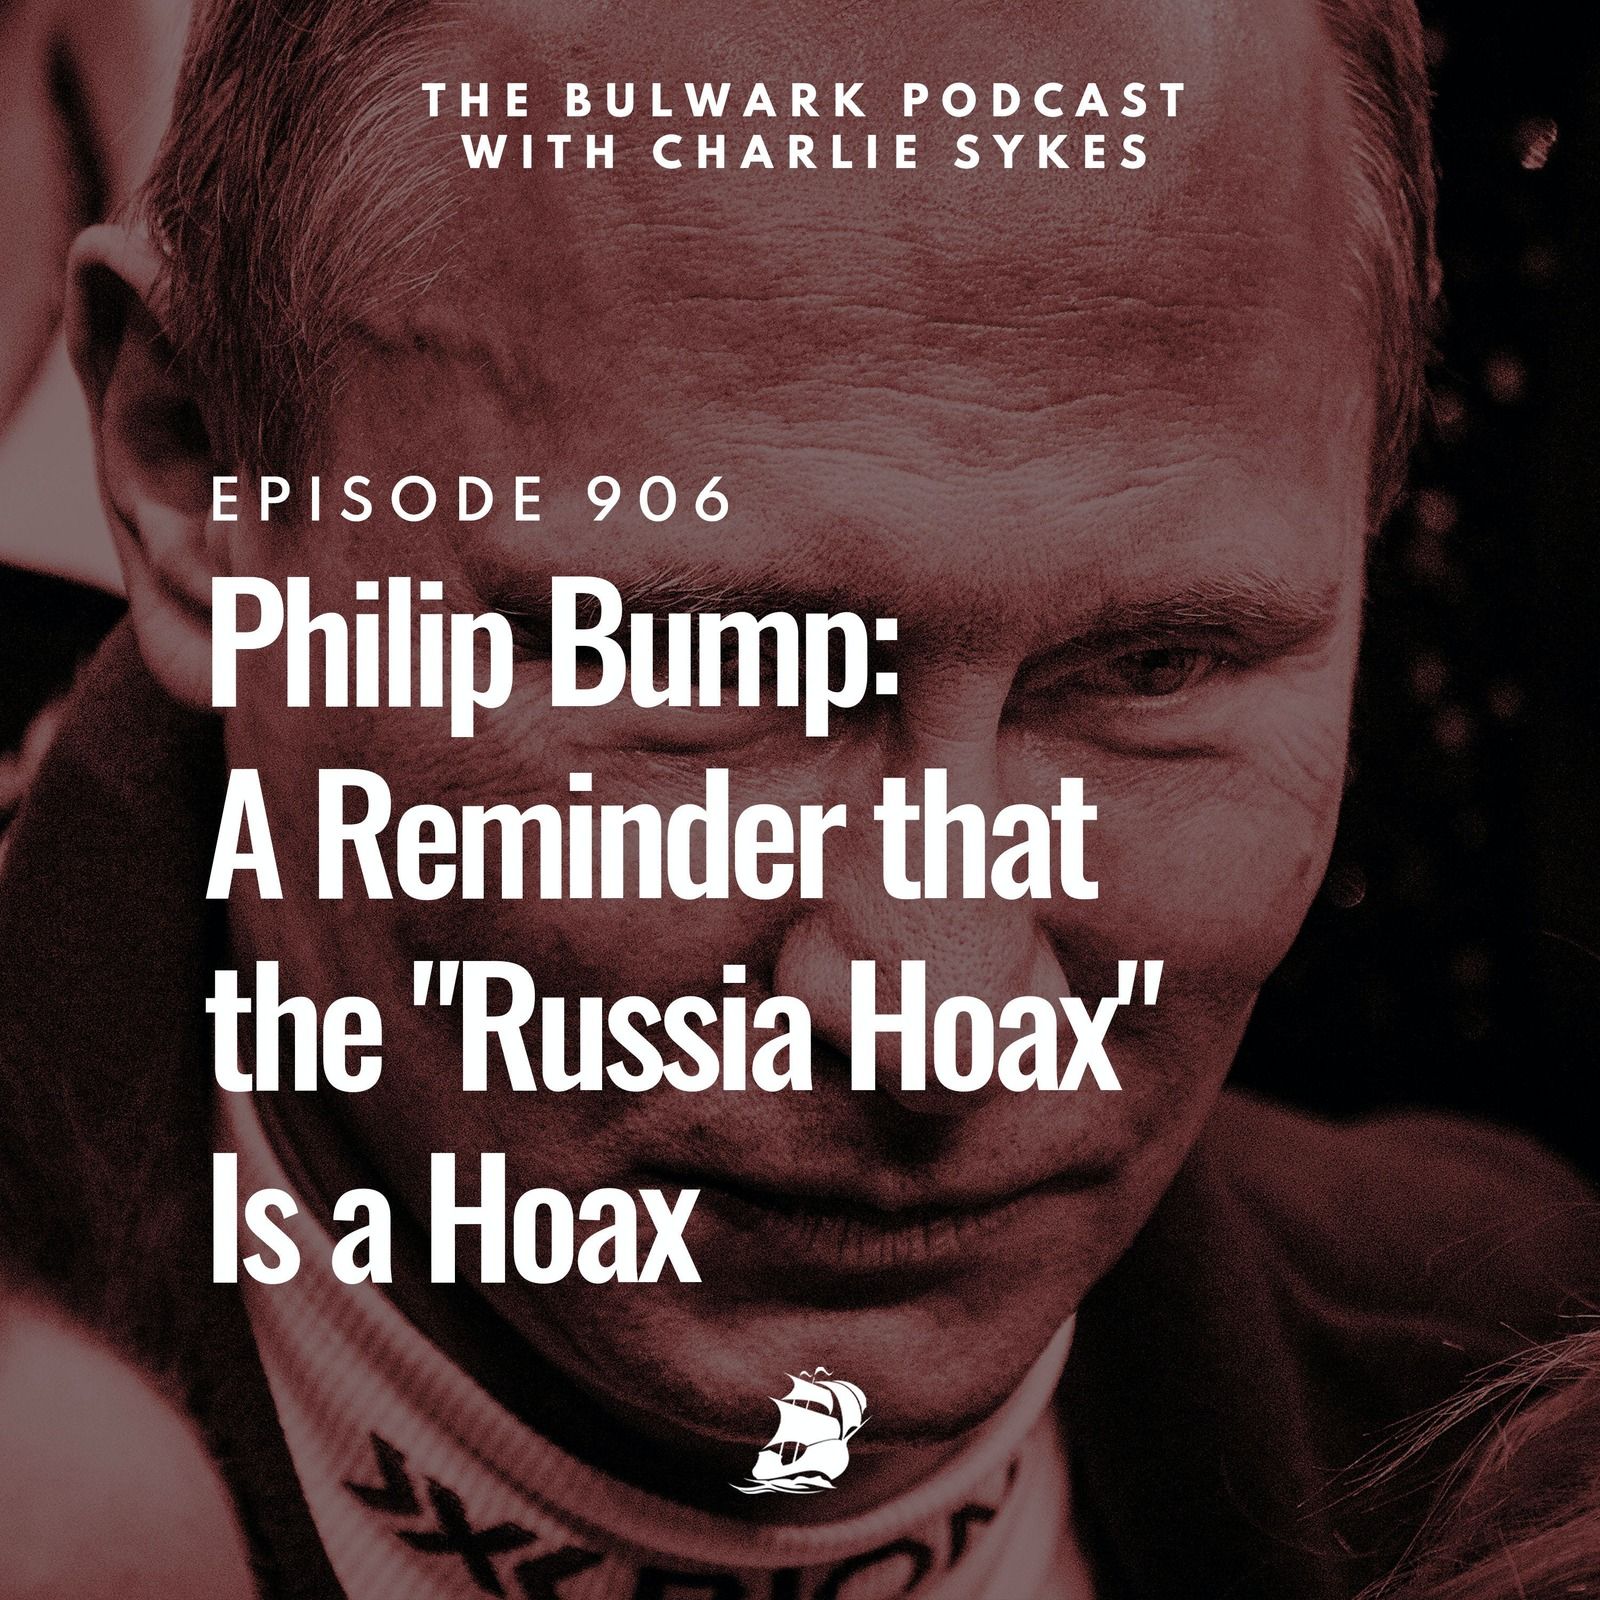 Philip Bump: A Reminder that the "Russia Hoax" Is a Hoax by The Bulwark Podcast